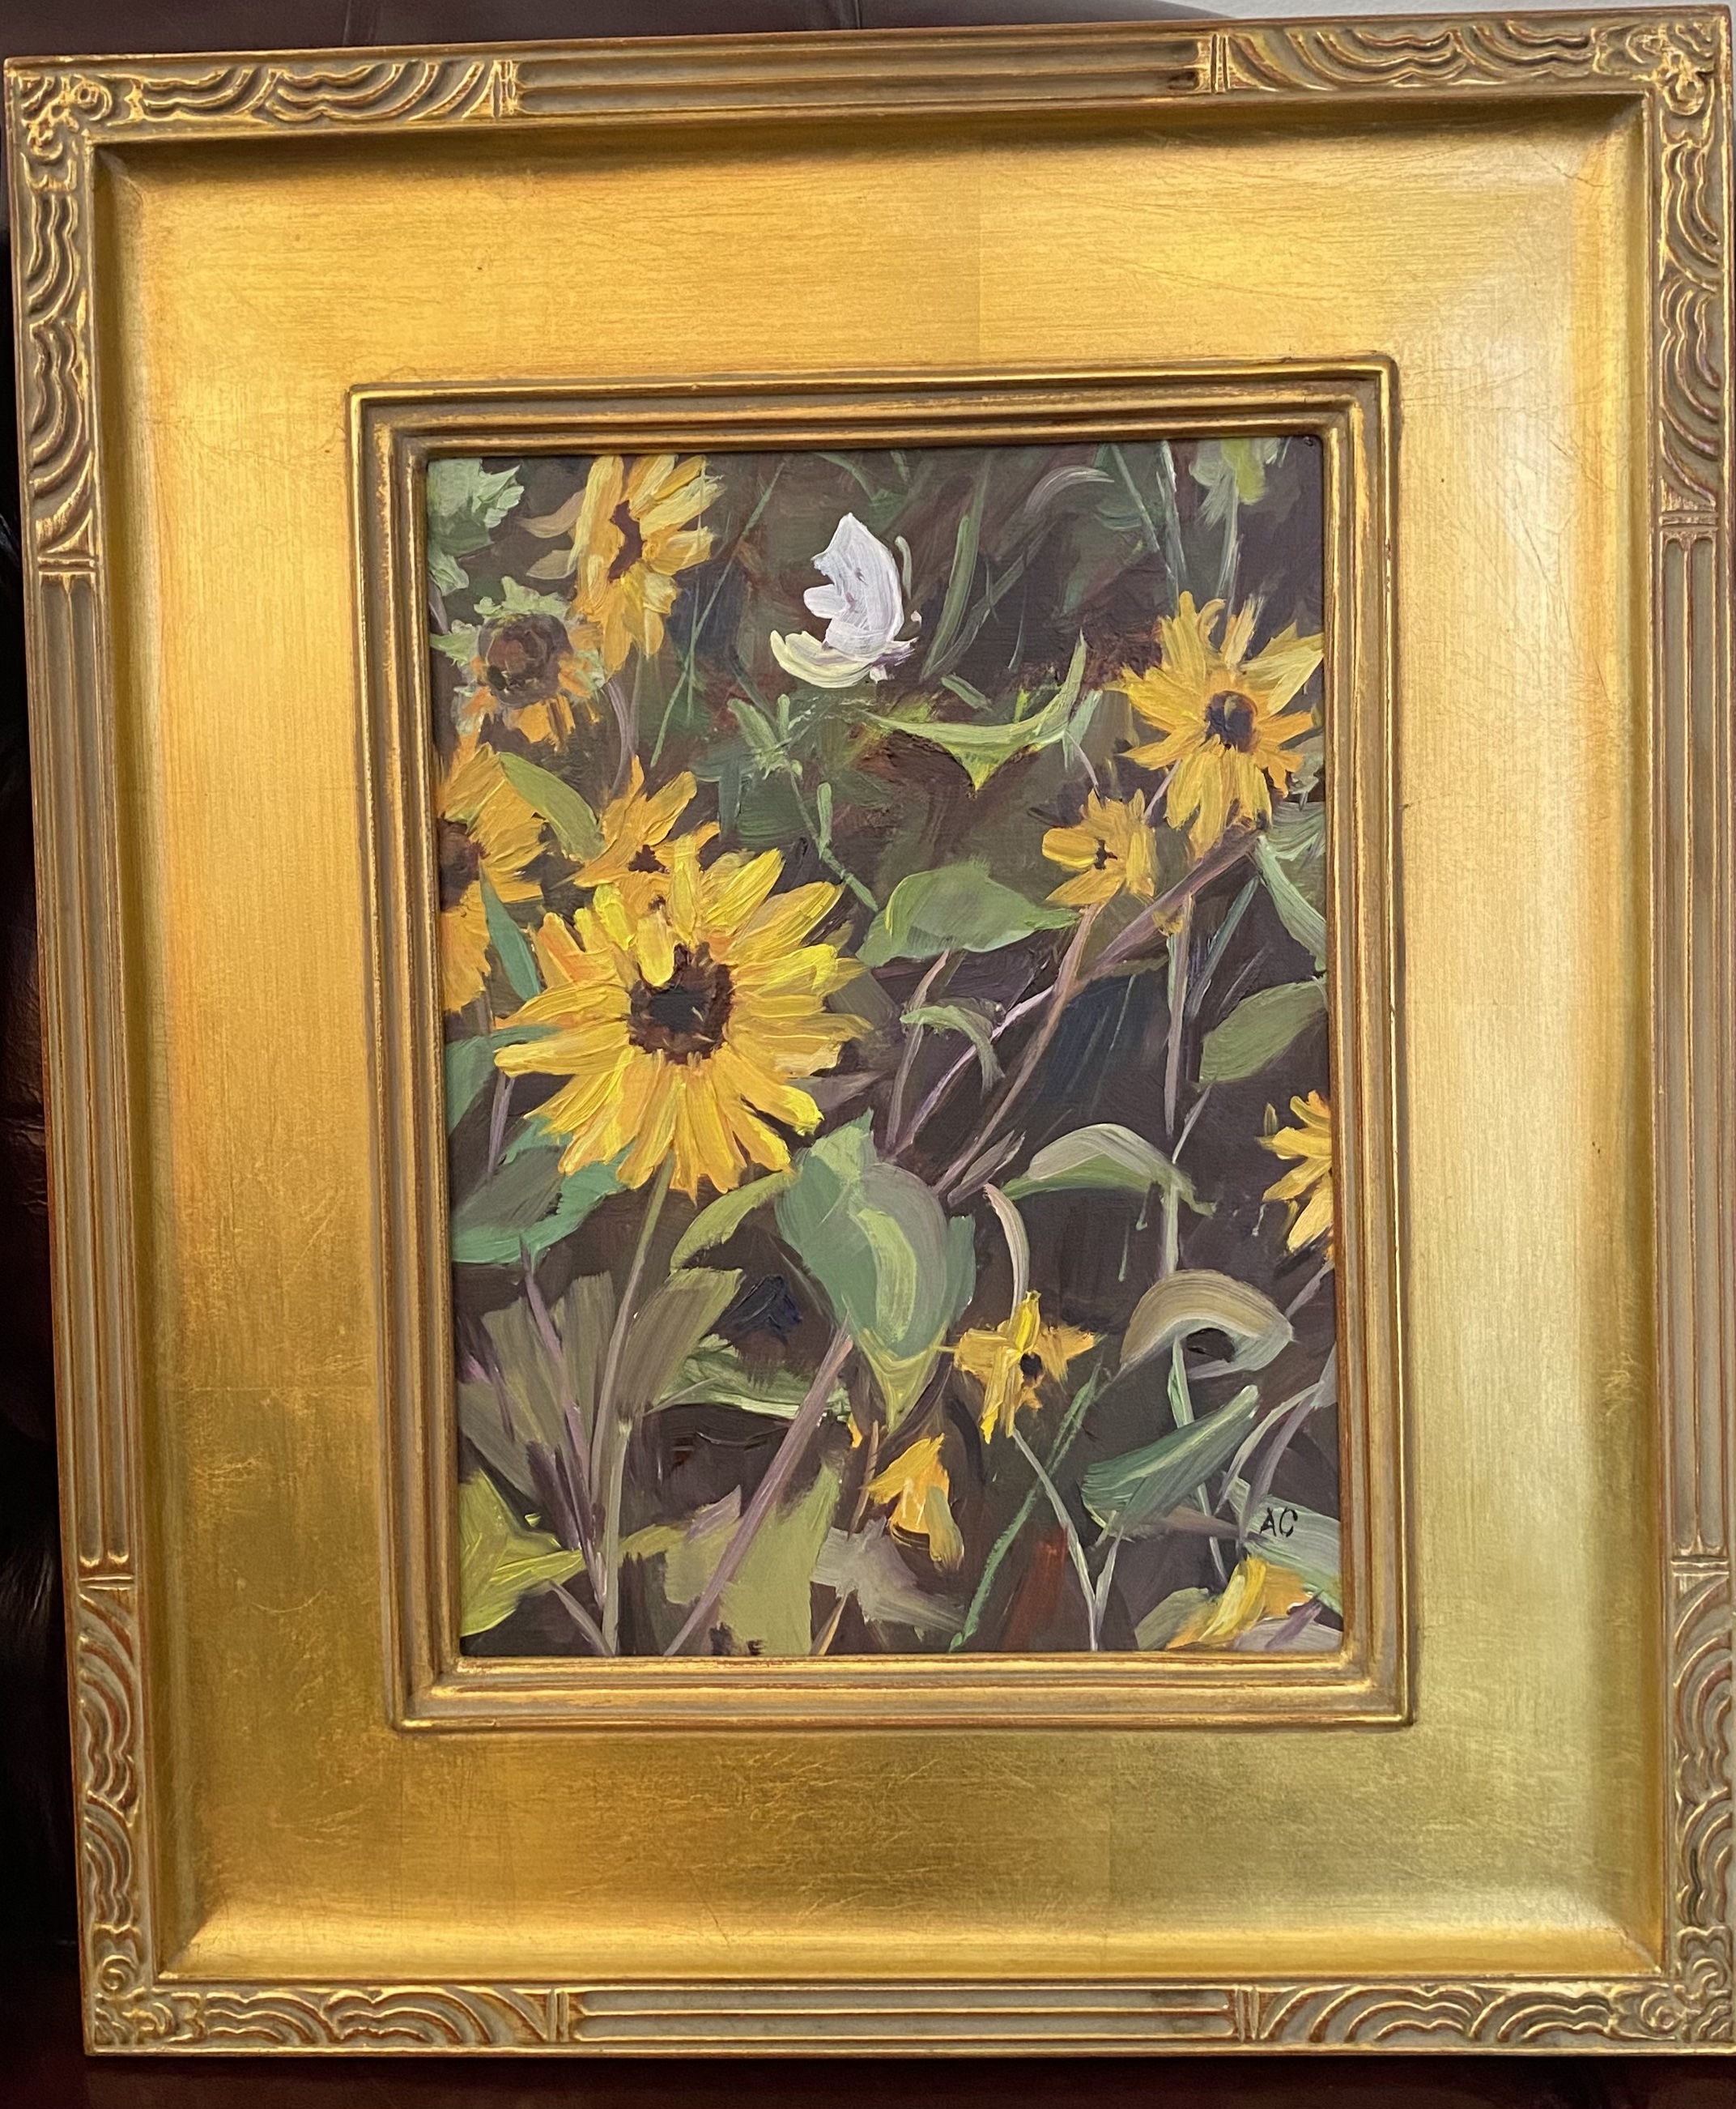 Sunflowers and a Butterfly
Oil
9" X 12"
$275.